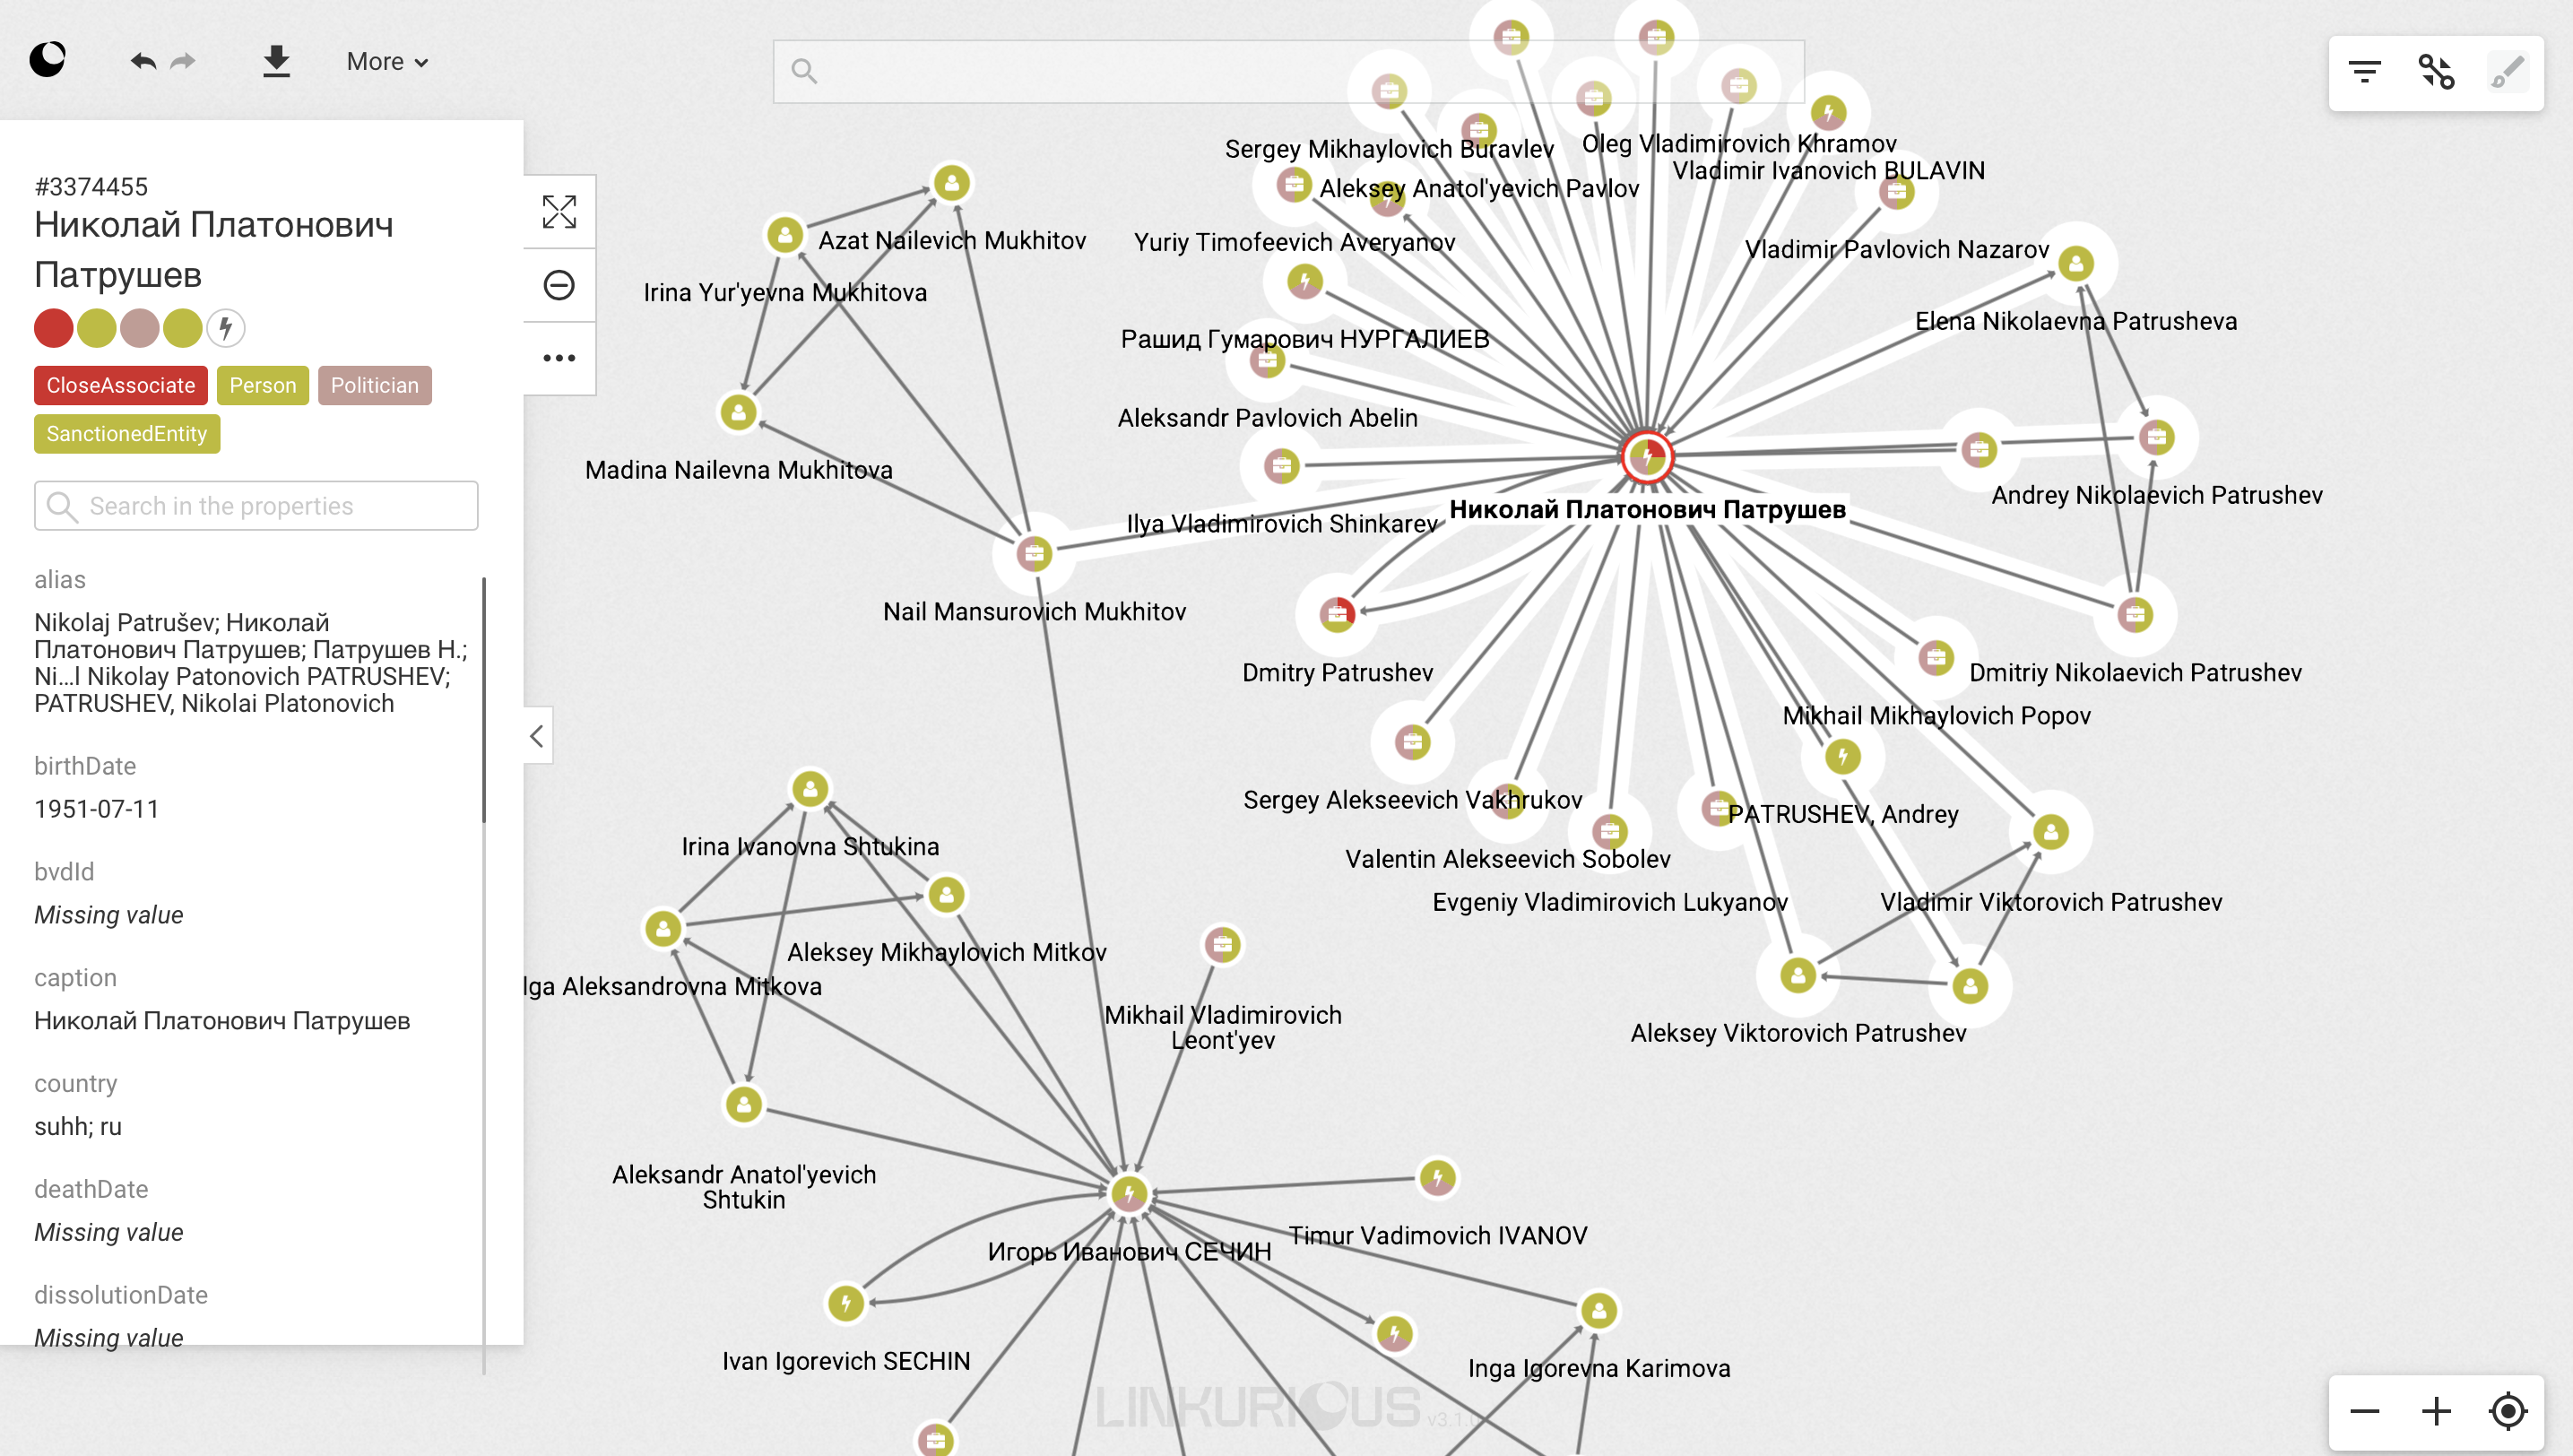 Graph visualization of networks of sanctioned Russians Igor Sechin and Nicolay Patrushev